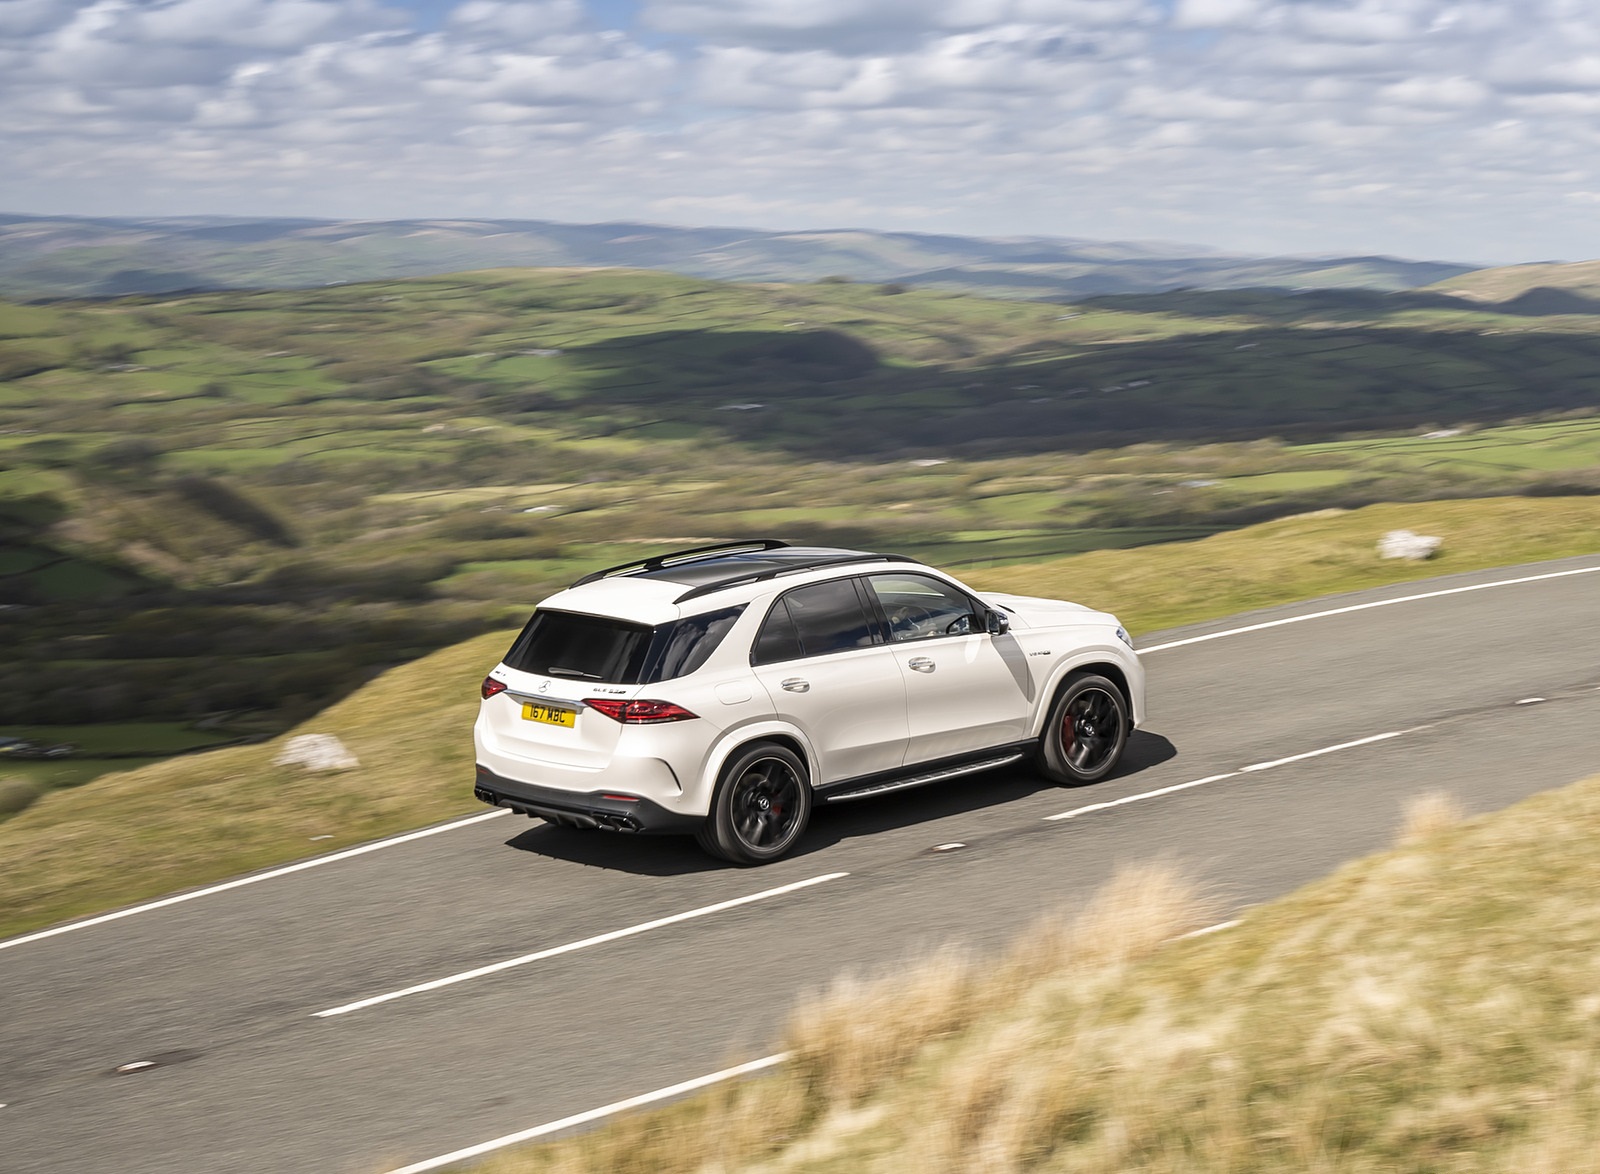 2021 Mercedes-AMG GLE 63 S 4MATIC (UK-Spec) Rear Three-Quarter Wallpapers #22 of 187